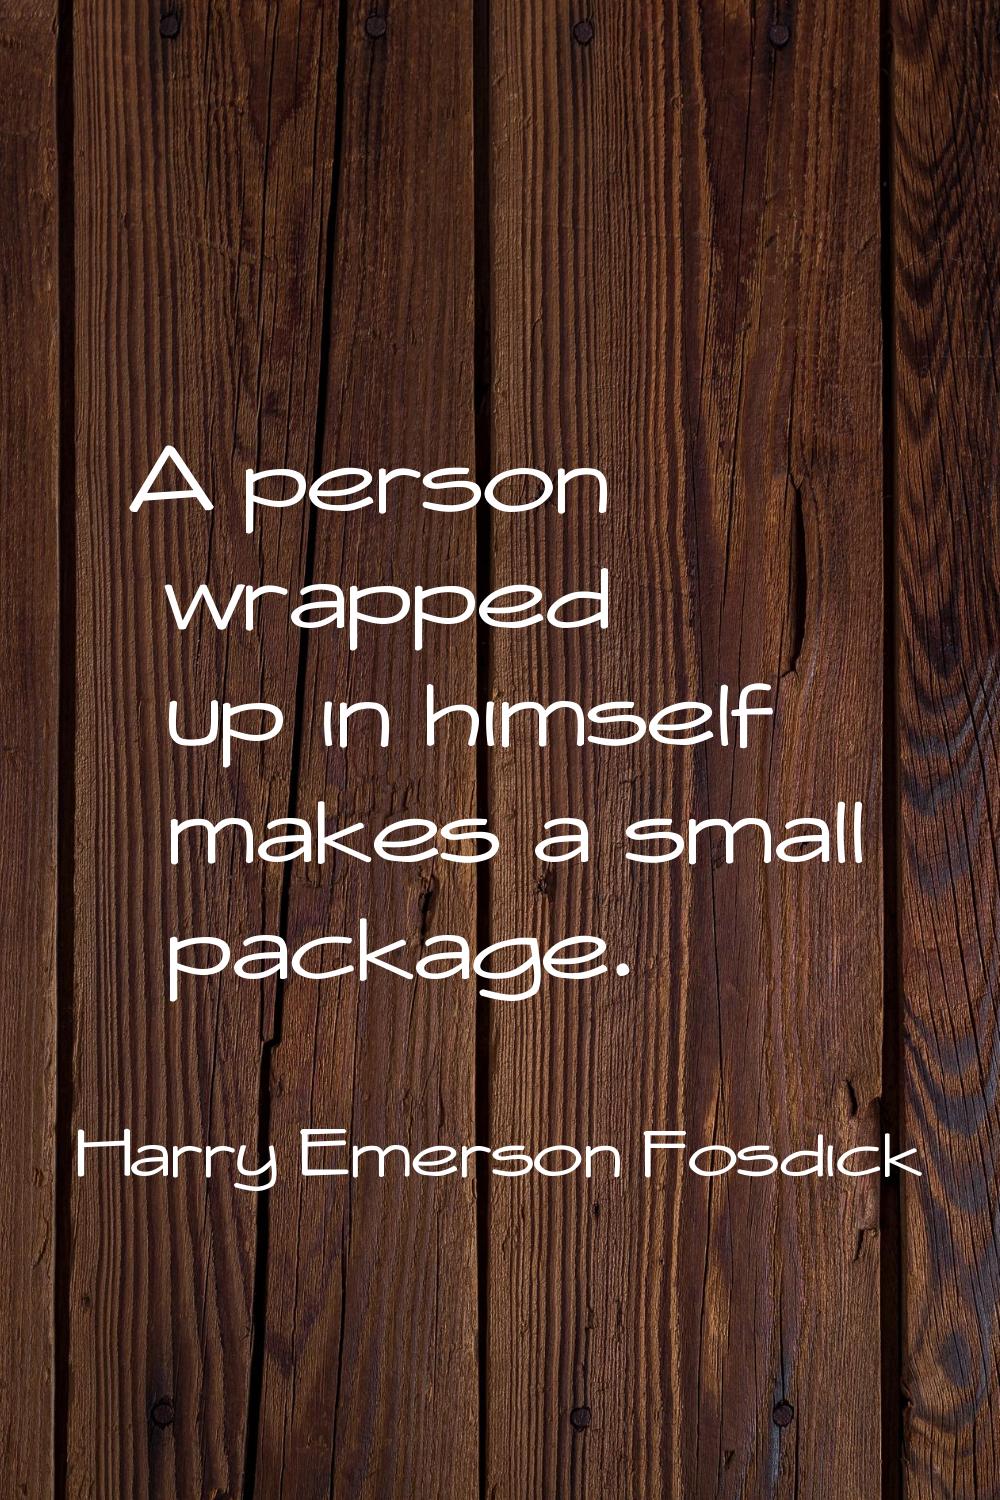 A person wrapped up in himself makes a small package.